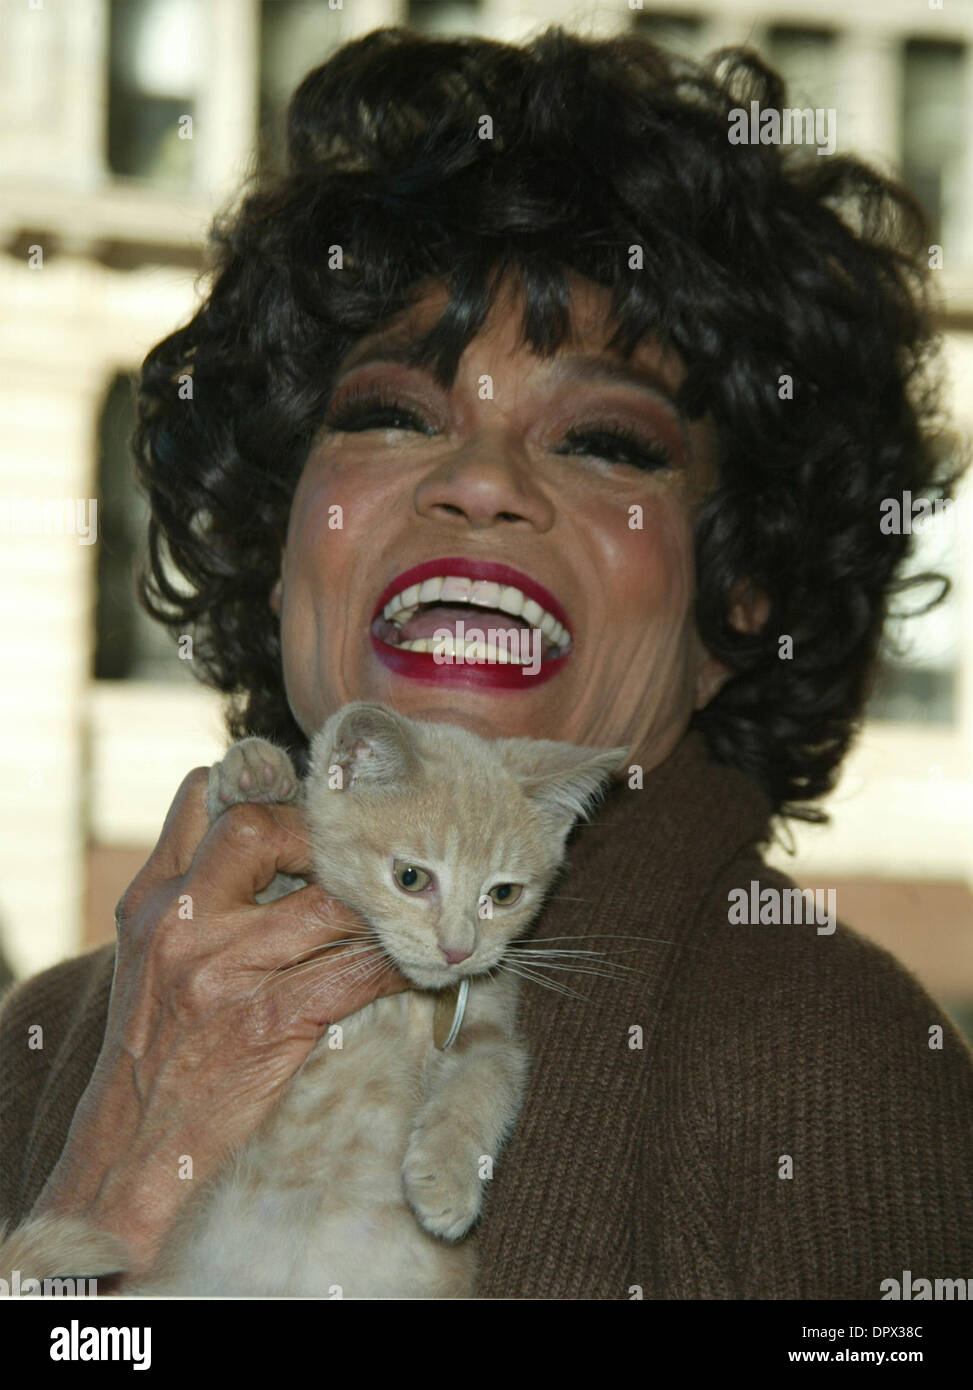 Dec 25, 2008 - New York, New York, USA - Singer and actress EARTHA KITT has died, aged 81, on Christmas day in New York. She was being treated for colon cancer. Kitt became famous for her portrayal of Catwoman in the television series Batman in the 1960s as well as her Christmas song 'Santa Baby.' PICTURED - Dec 17, 2002; New York, NY, USA; 'Catwoman' EARTHA KITT kicks off North Sh Stock Photo